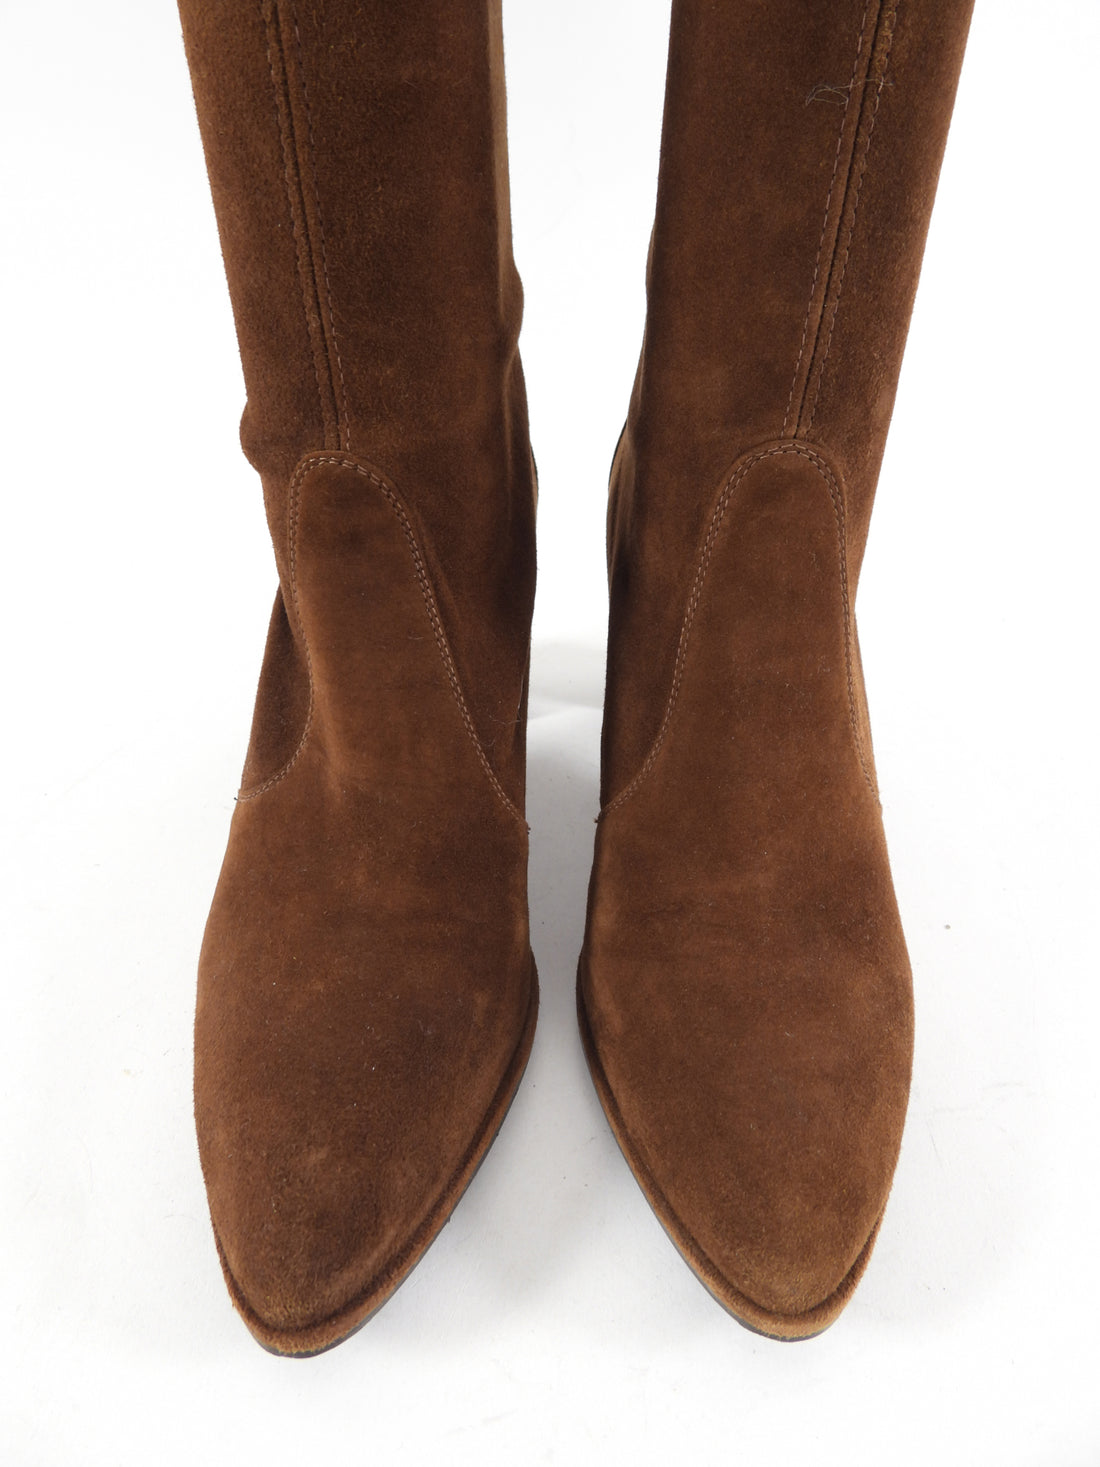 Stuart Weitzman Brown Suede Over the Knee Stretch Boots - 7.5